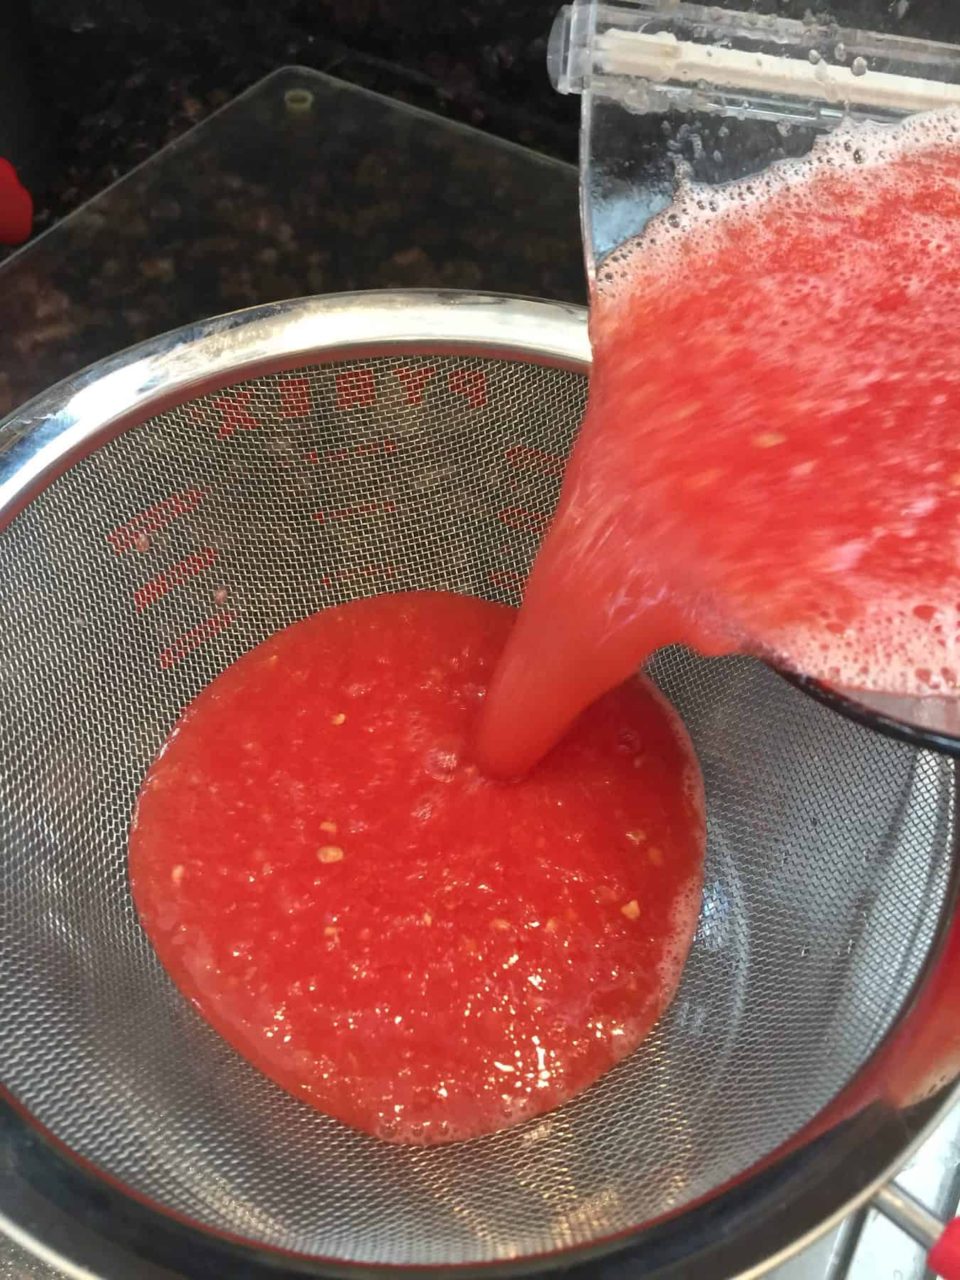 Picture of watermelon liquid being strained in a mesh strainer for Watermelon Lime Sorbet